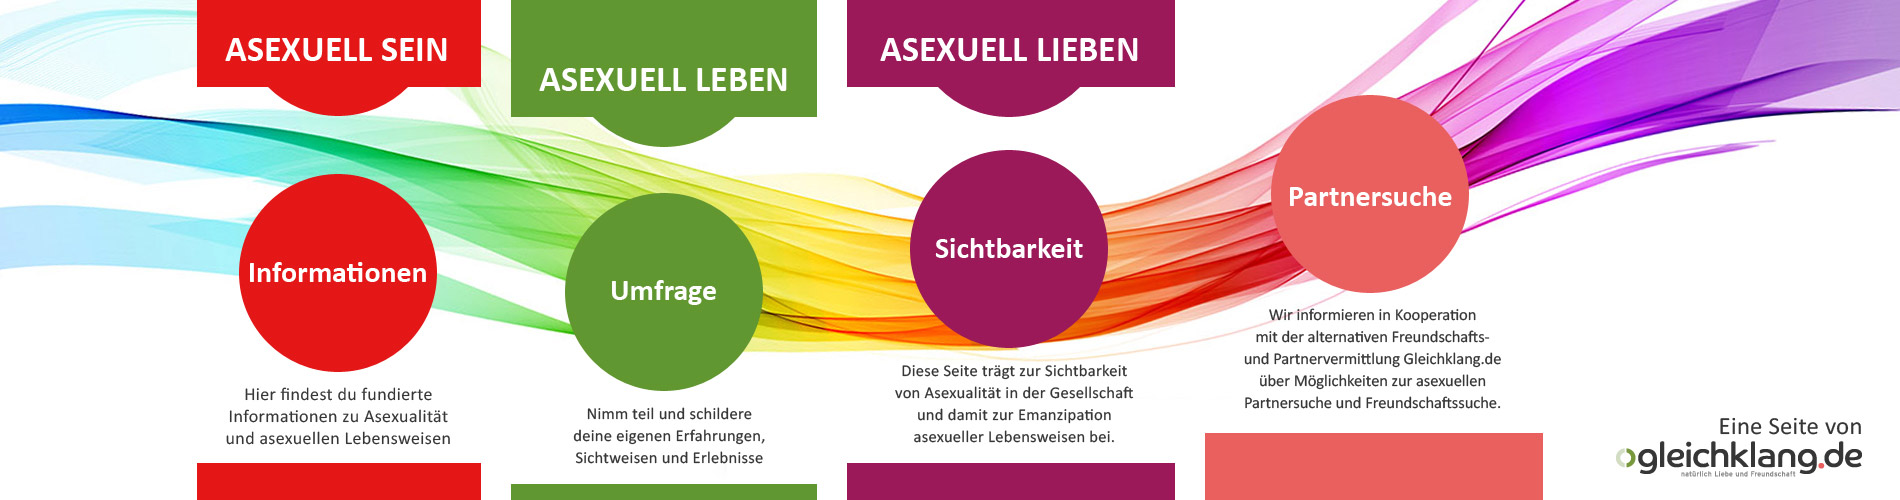 Test a sexualität Asexuality Test?